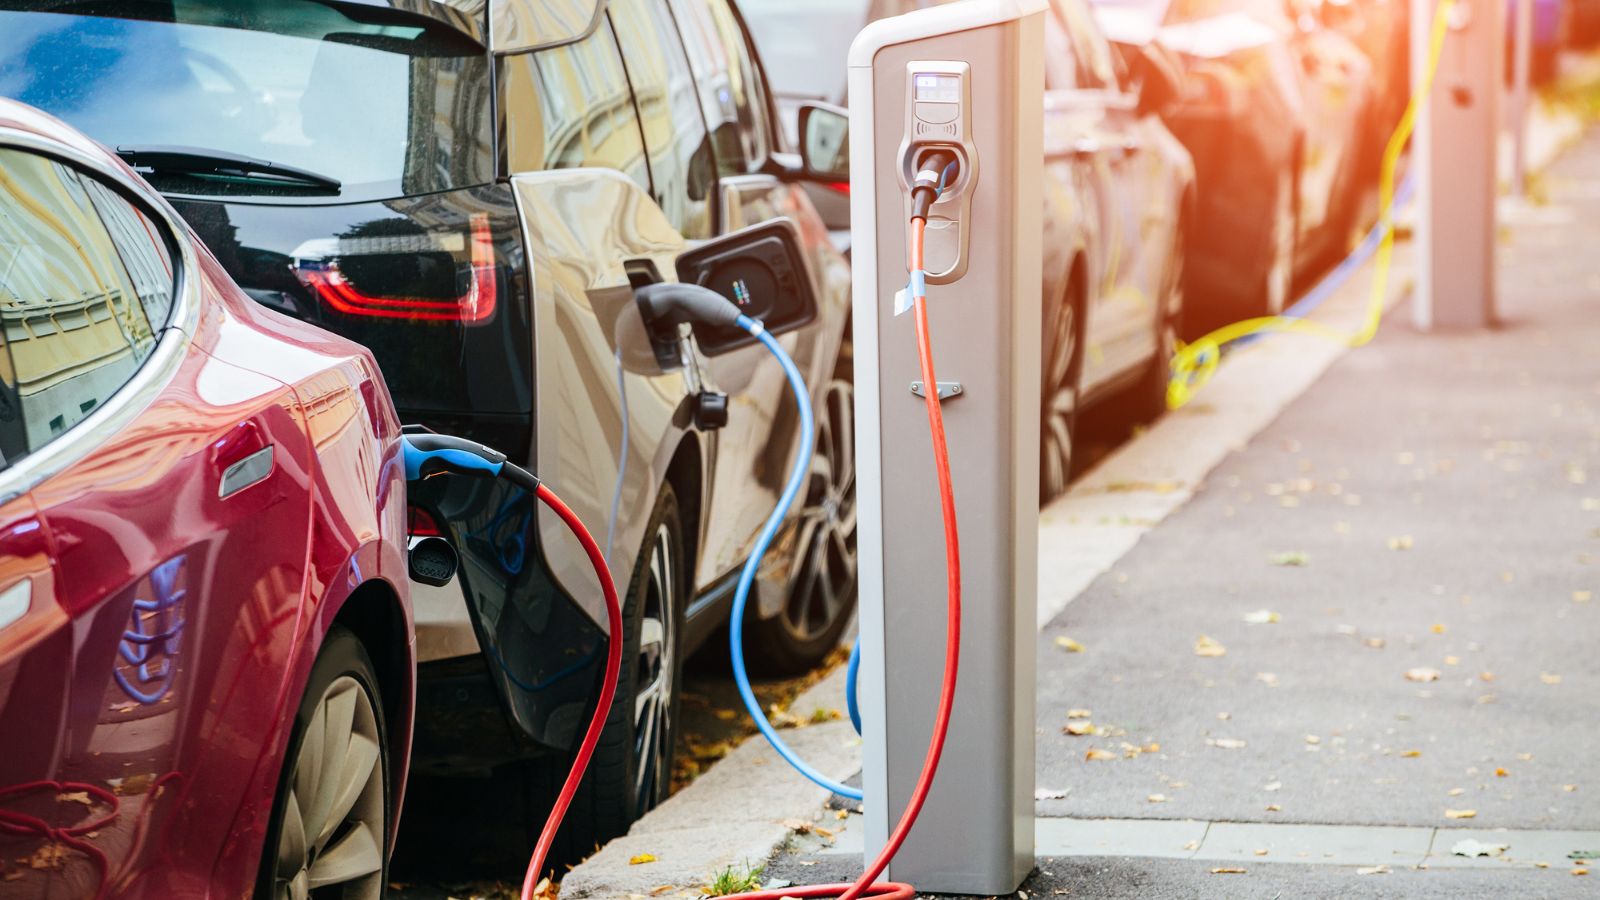 <p>While electric vehicles produce no <a href="https://www.acela.org/fuels-basics/fuels-and-emissions/#:~:text=service%20stations.%203-,TAILPIPE%20EMISSIONS,-Tailpipe%20emissions%20are">tailpipe emissions</a>, concerns arise about their indirect impact on air quality. The source of electricity used for charging, often derived from fossil fuels, can contribute to pollution. Furthermore, tire wear and brake dust from electric cars emit particulate matter, potentially compromising air quality.</p>